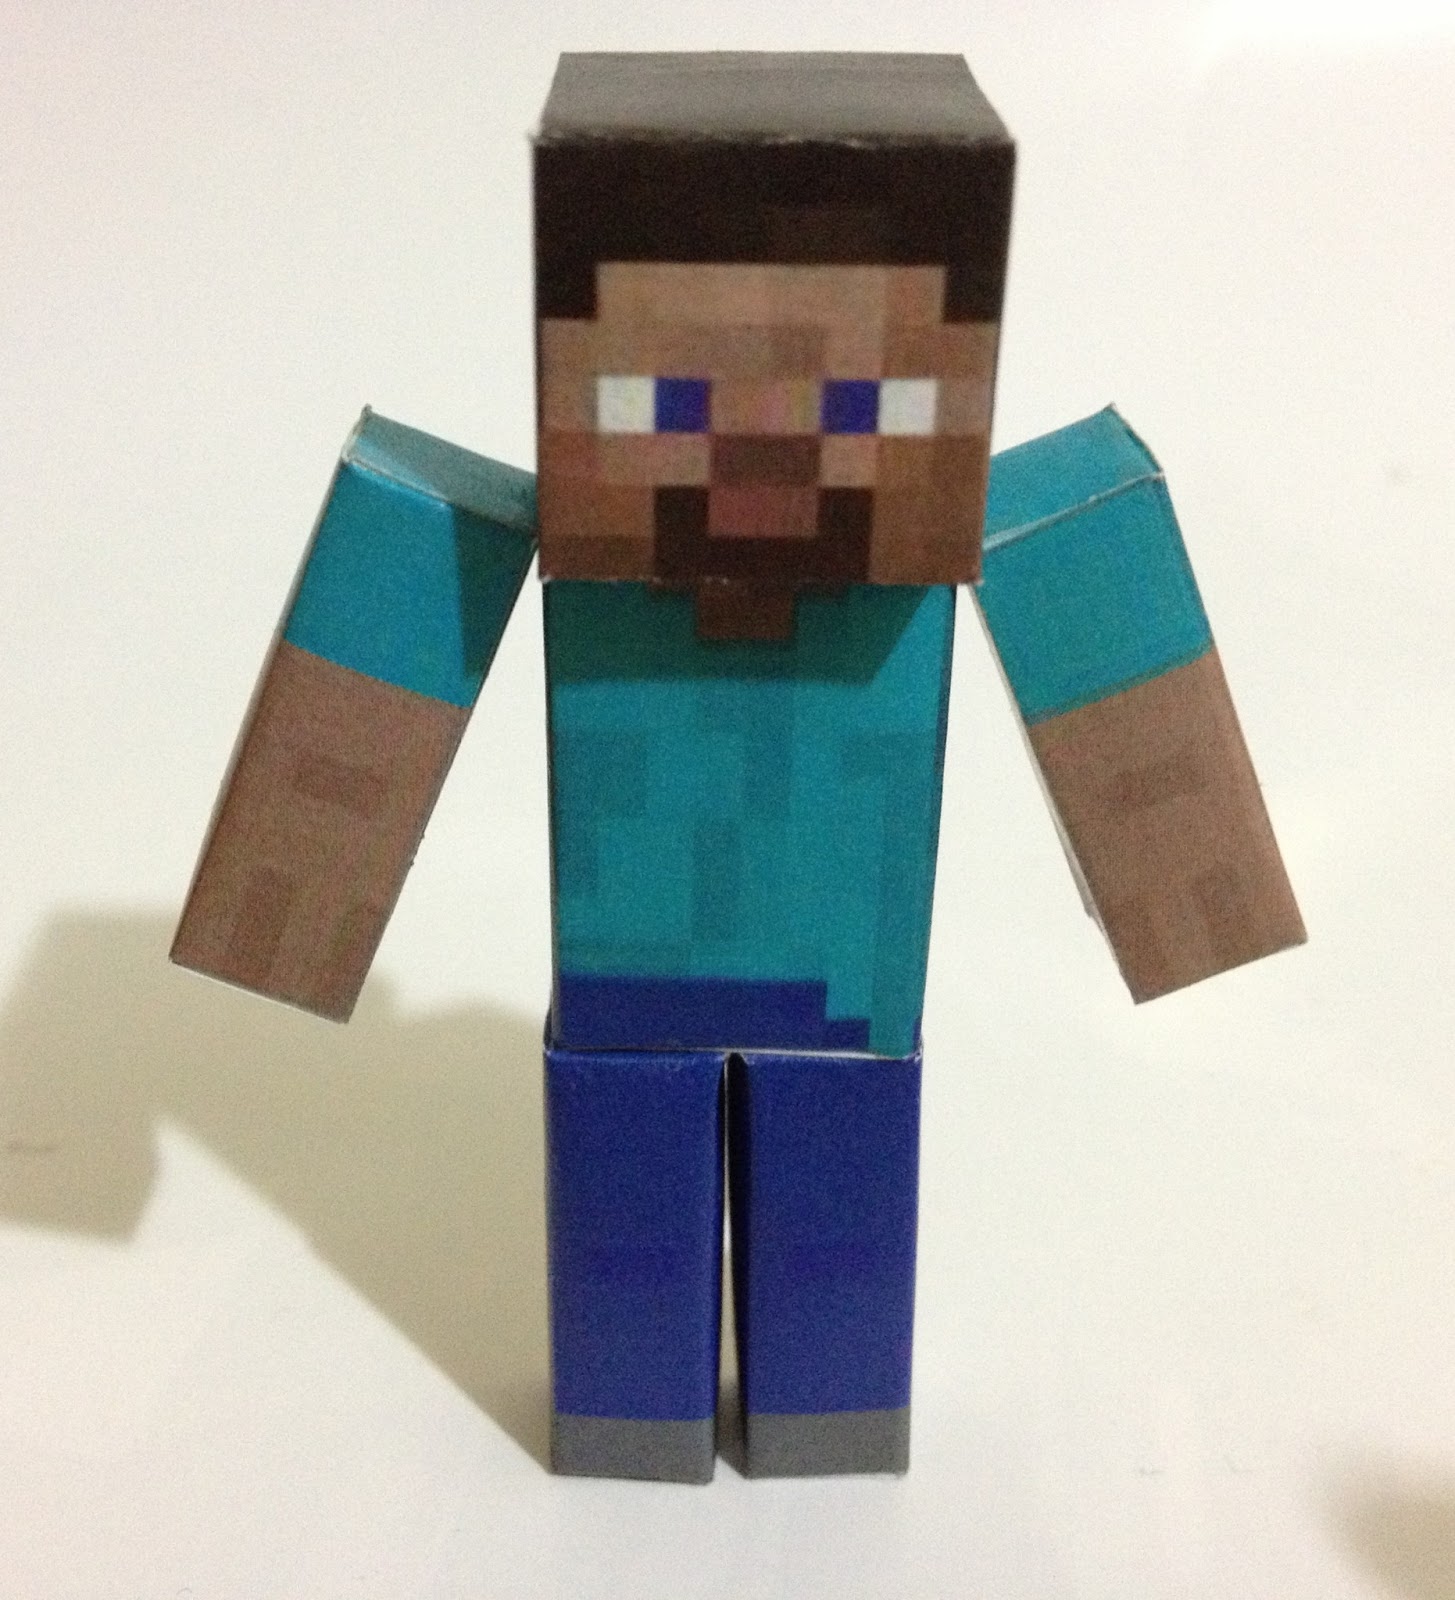 Mini At Least Papercraft Minecraft Grass Cesped And Stone Roca